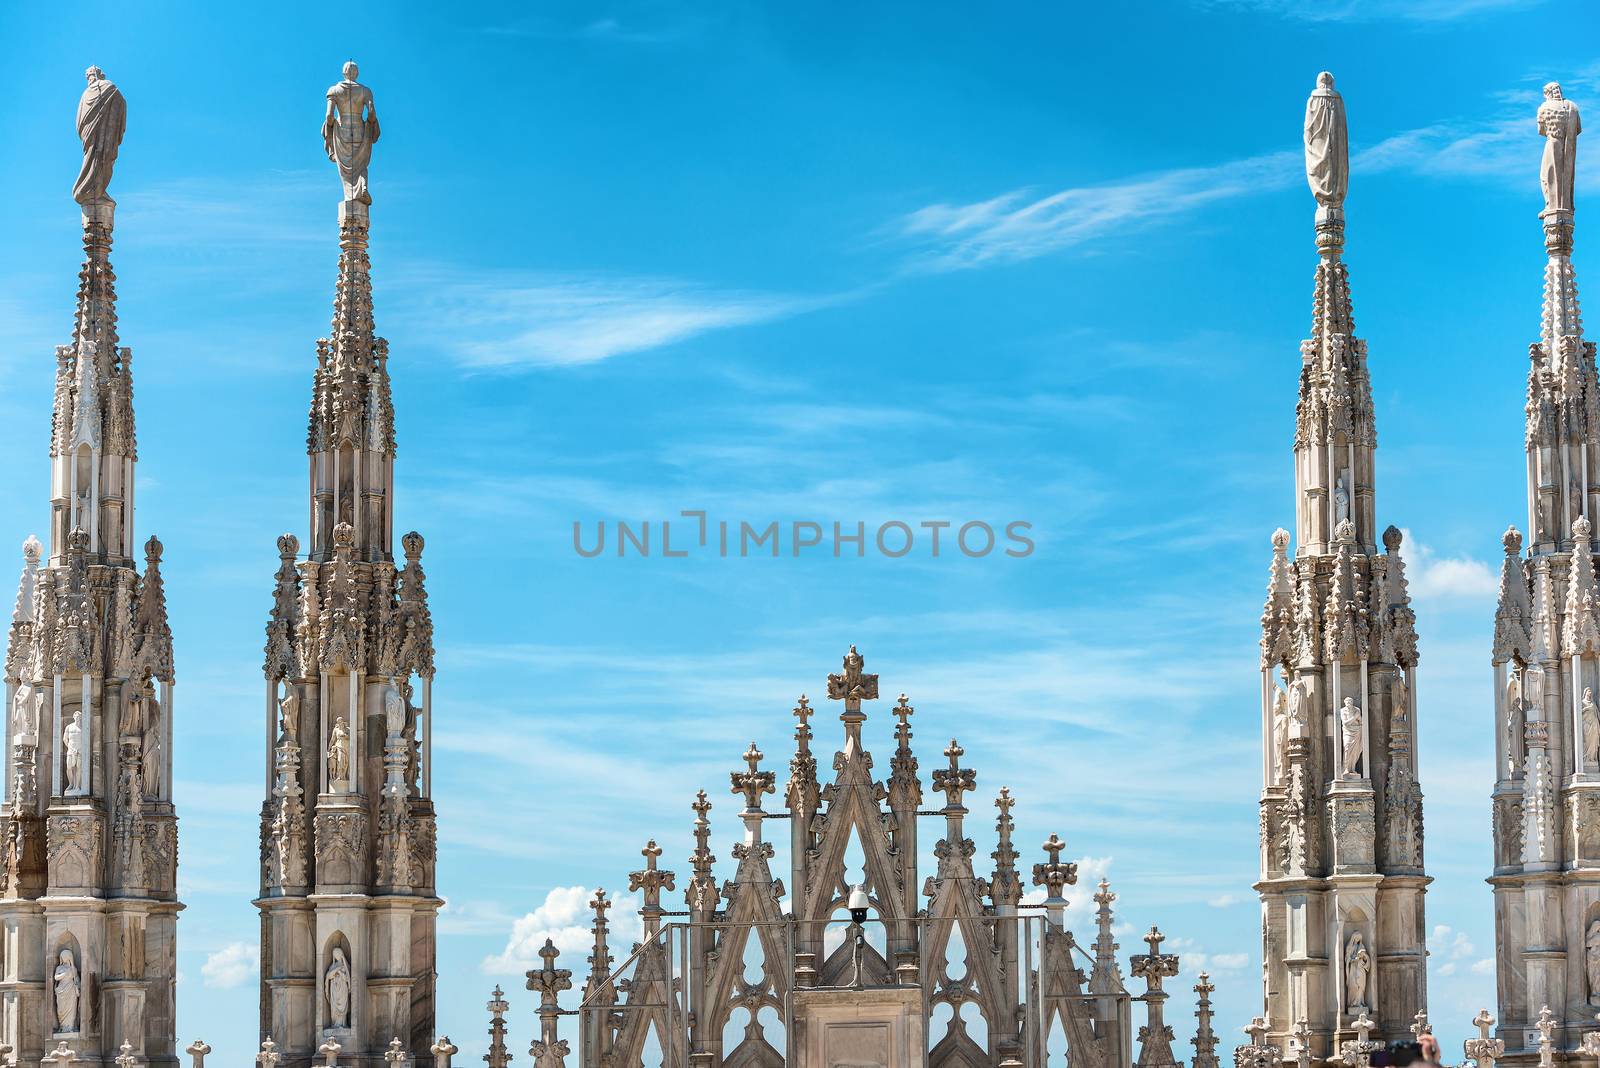 White marble statues on the roof of famous Cathedral Duomo di Milano on piazza in Milan, Italy